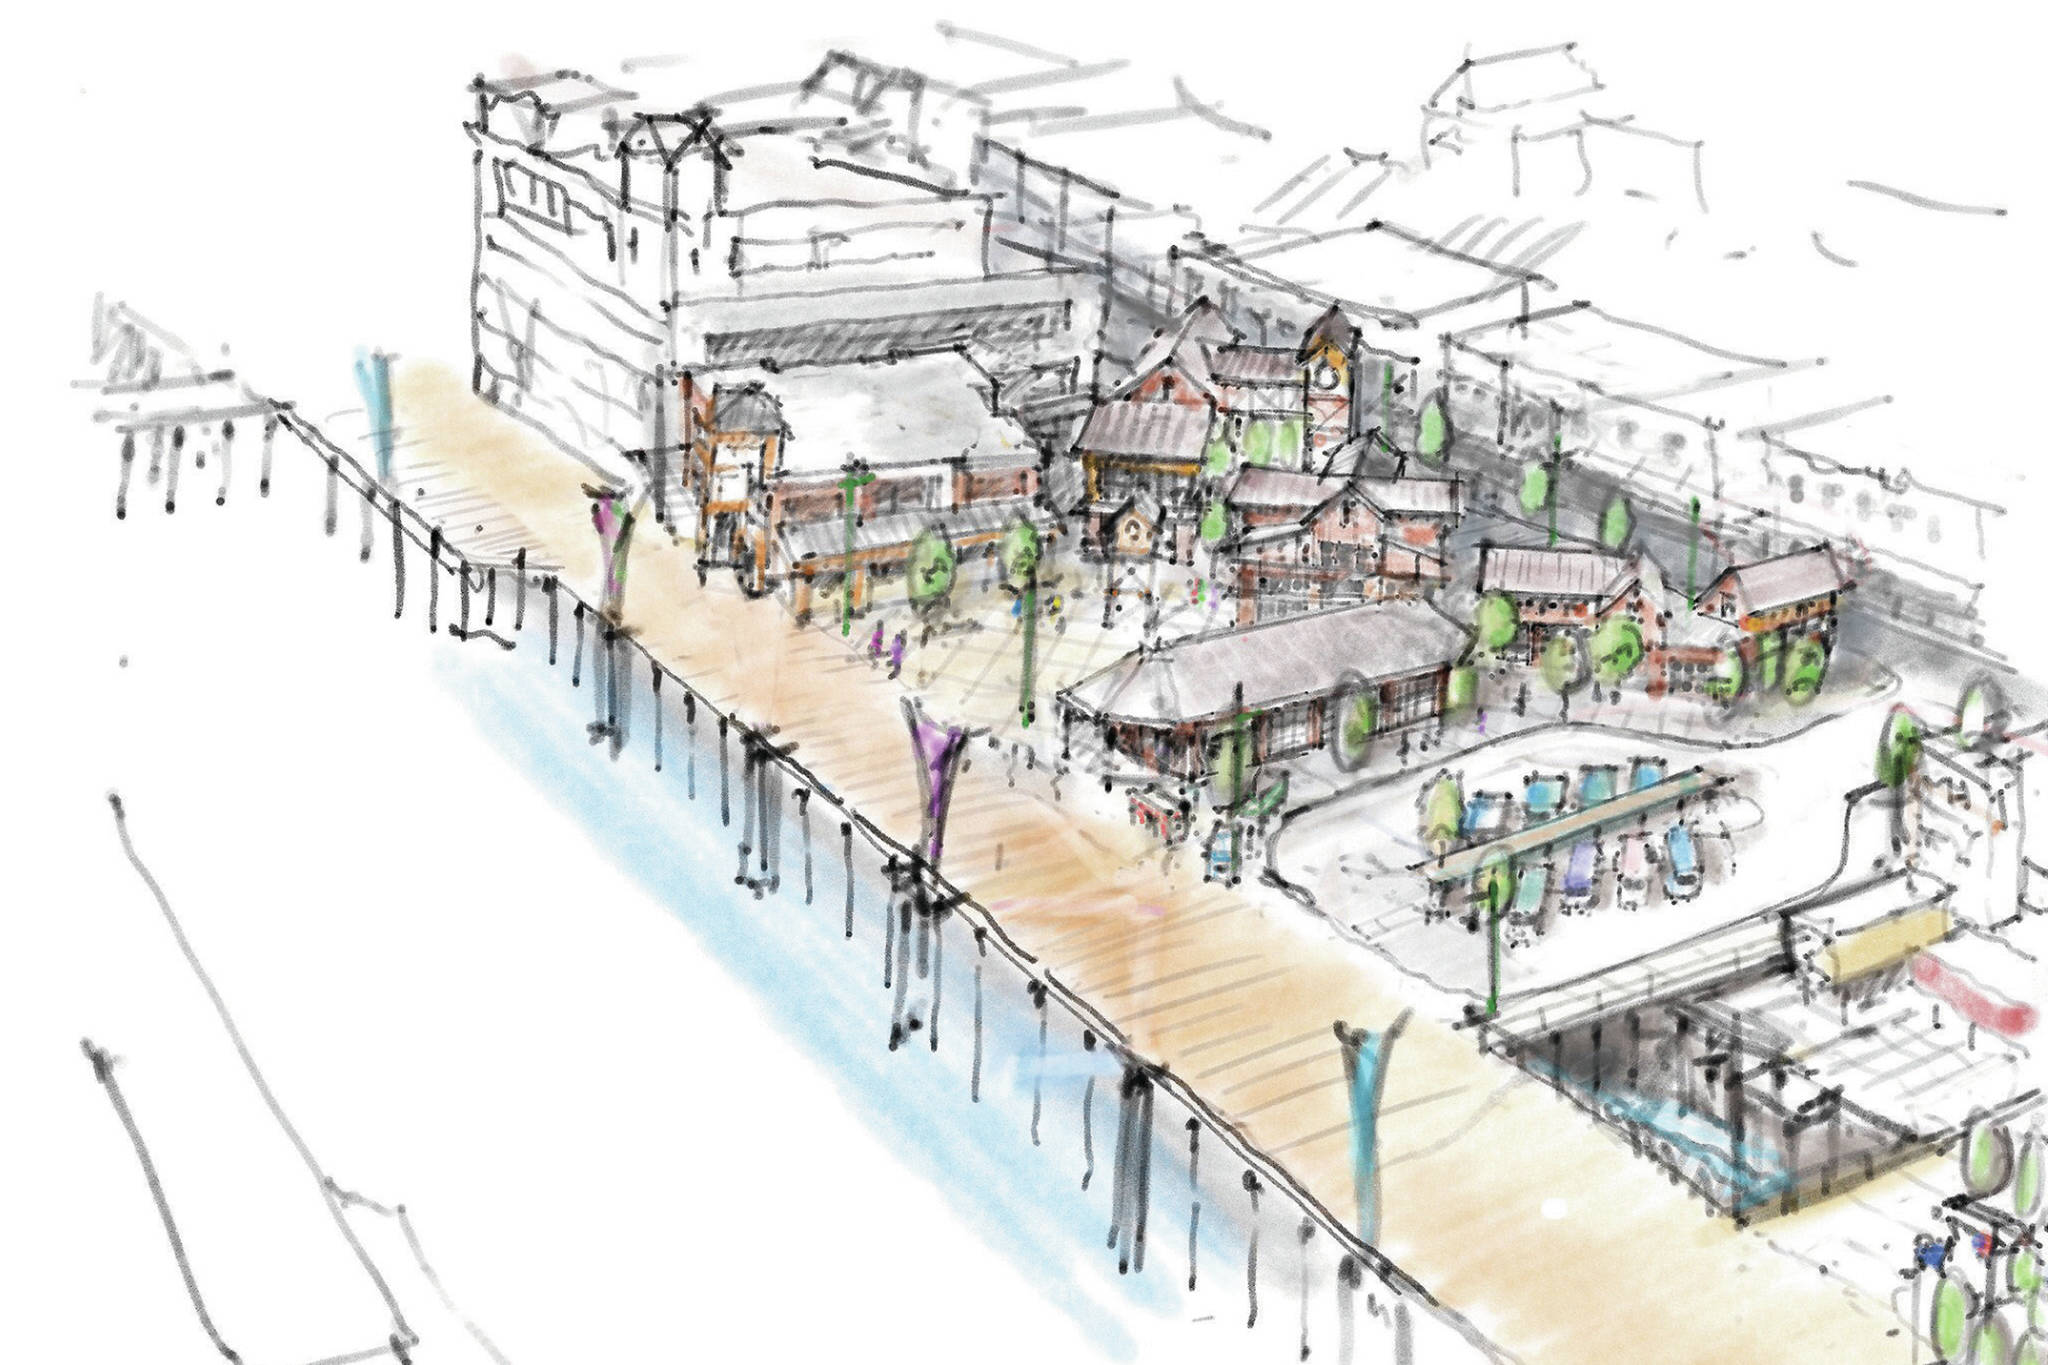 This artistic rendering of the proposed Archipelago Properties, LLC development is seen in a 2017 document posted by the City and Borough of Juneau. (Courtesy Photo | City and Borough of Juneau)